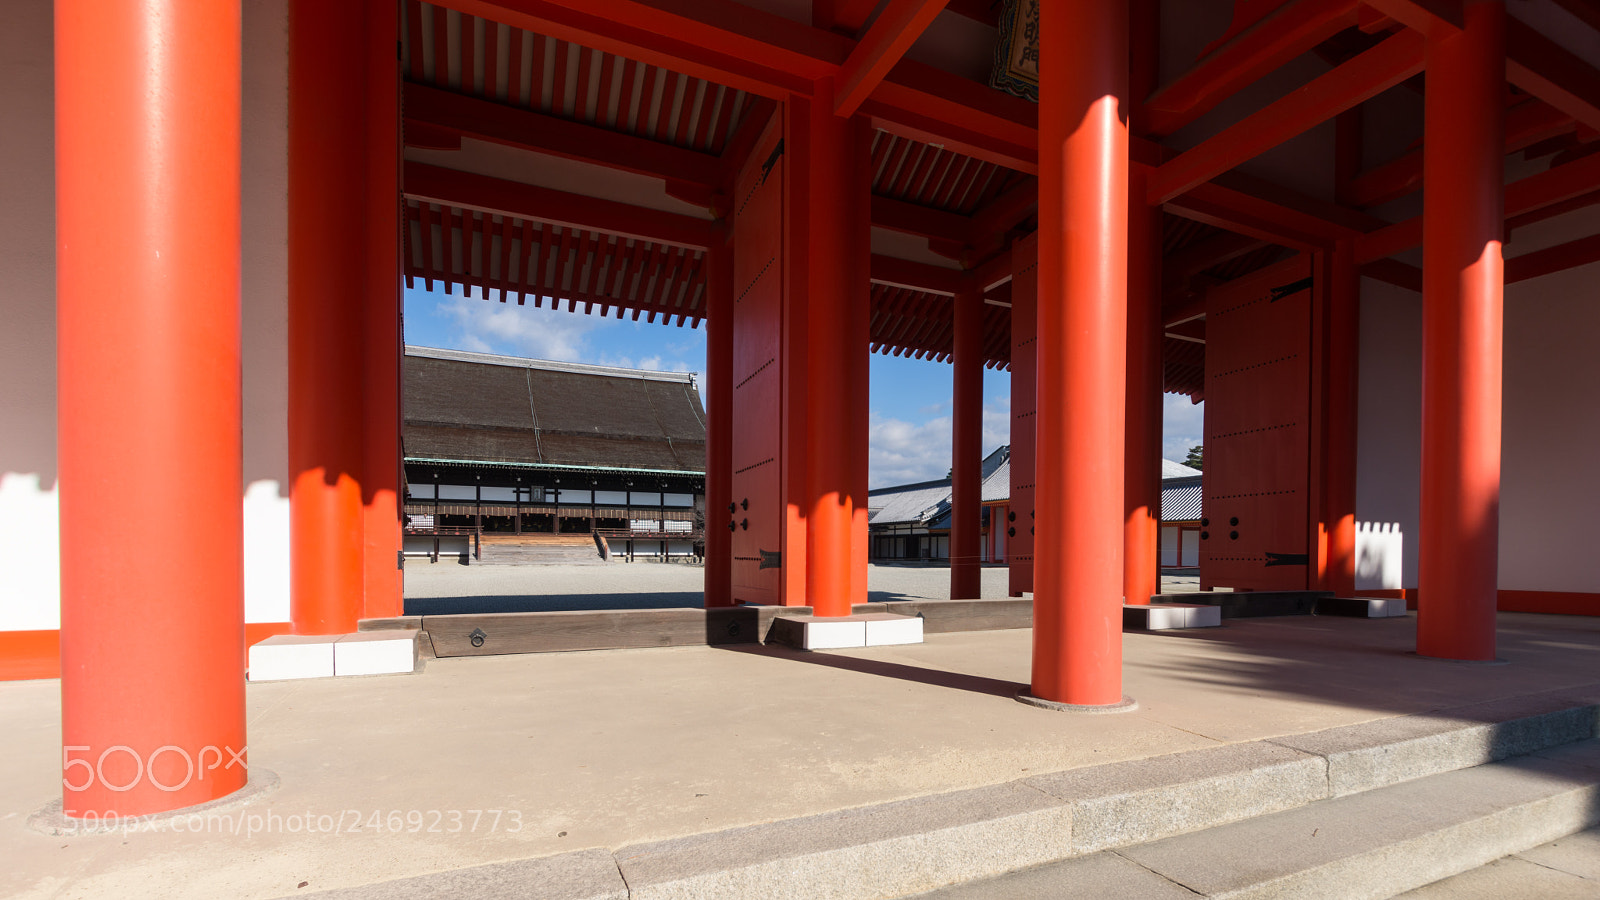 Pentax K-3 sample photo. Imperial palace kyoto photography